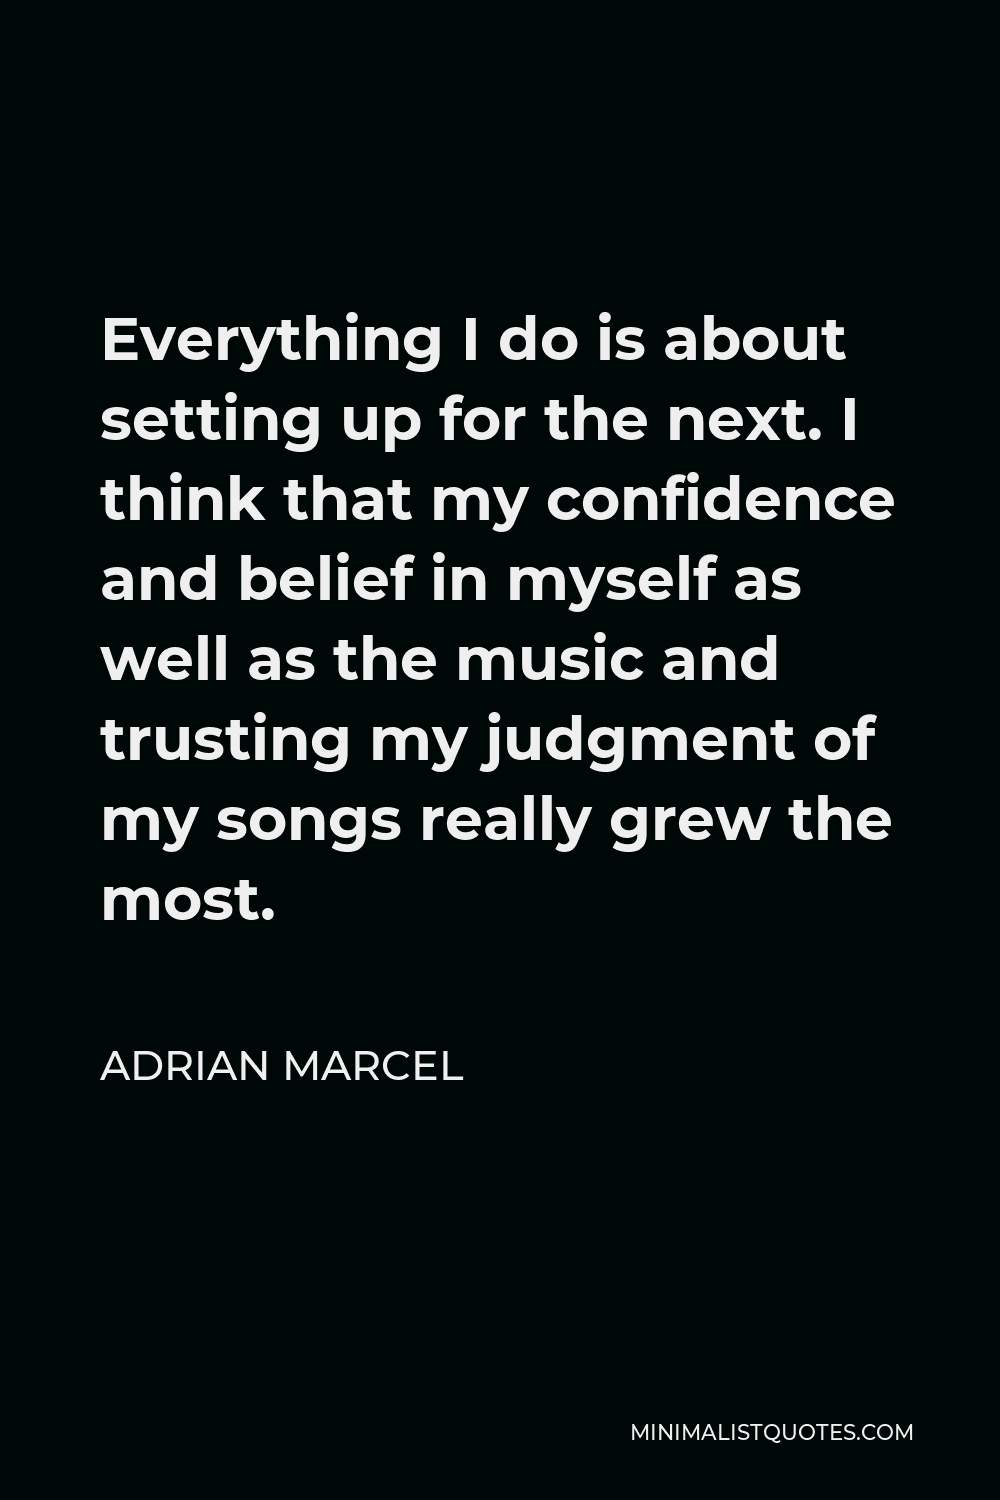 Adrian Marcel Quote - Everything I do is about setting up for the next. I think that my confidence and belief in myself as well as the music and trusting my judgment of my songs really grew the most.